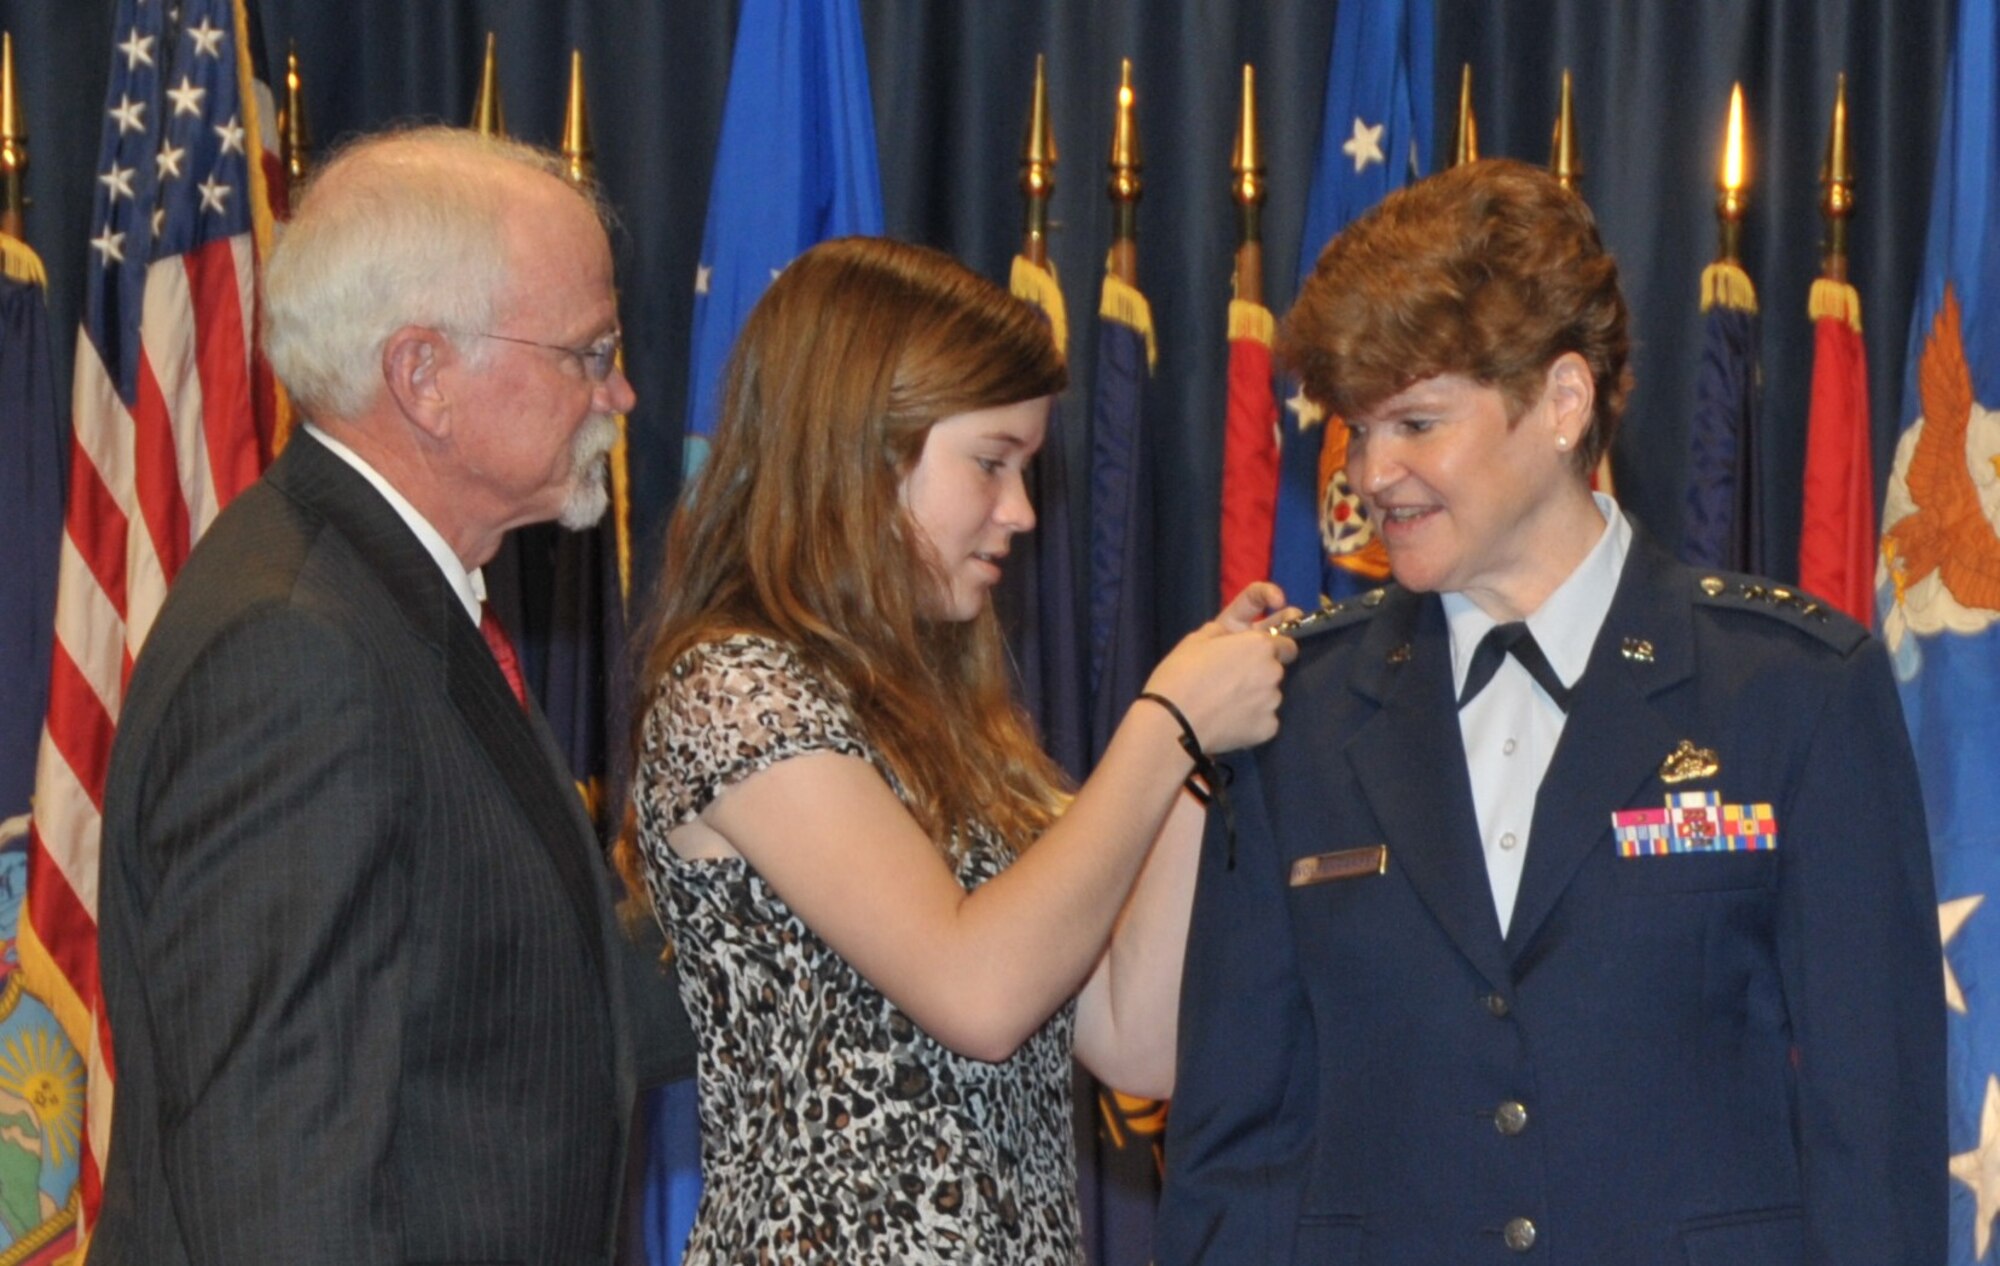 Gen. Janet C. Wolfenbarger is pinned with her fourth star by her daughter, Callie, and her husband, retired Col. Craig Wolfenbarger, during a promotion ceremony June 5, 2012, at the National Museum of the United States Air Force. The promotion makes Gen. Wolfenbarger the first four-star general in the Air Force.  (U.S. Air Force photo/Michelle Gigante)